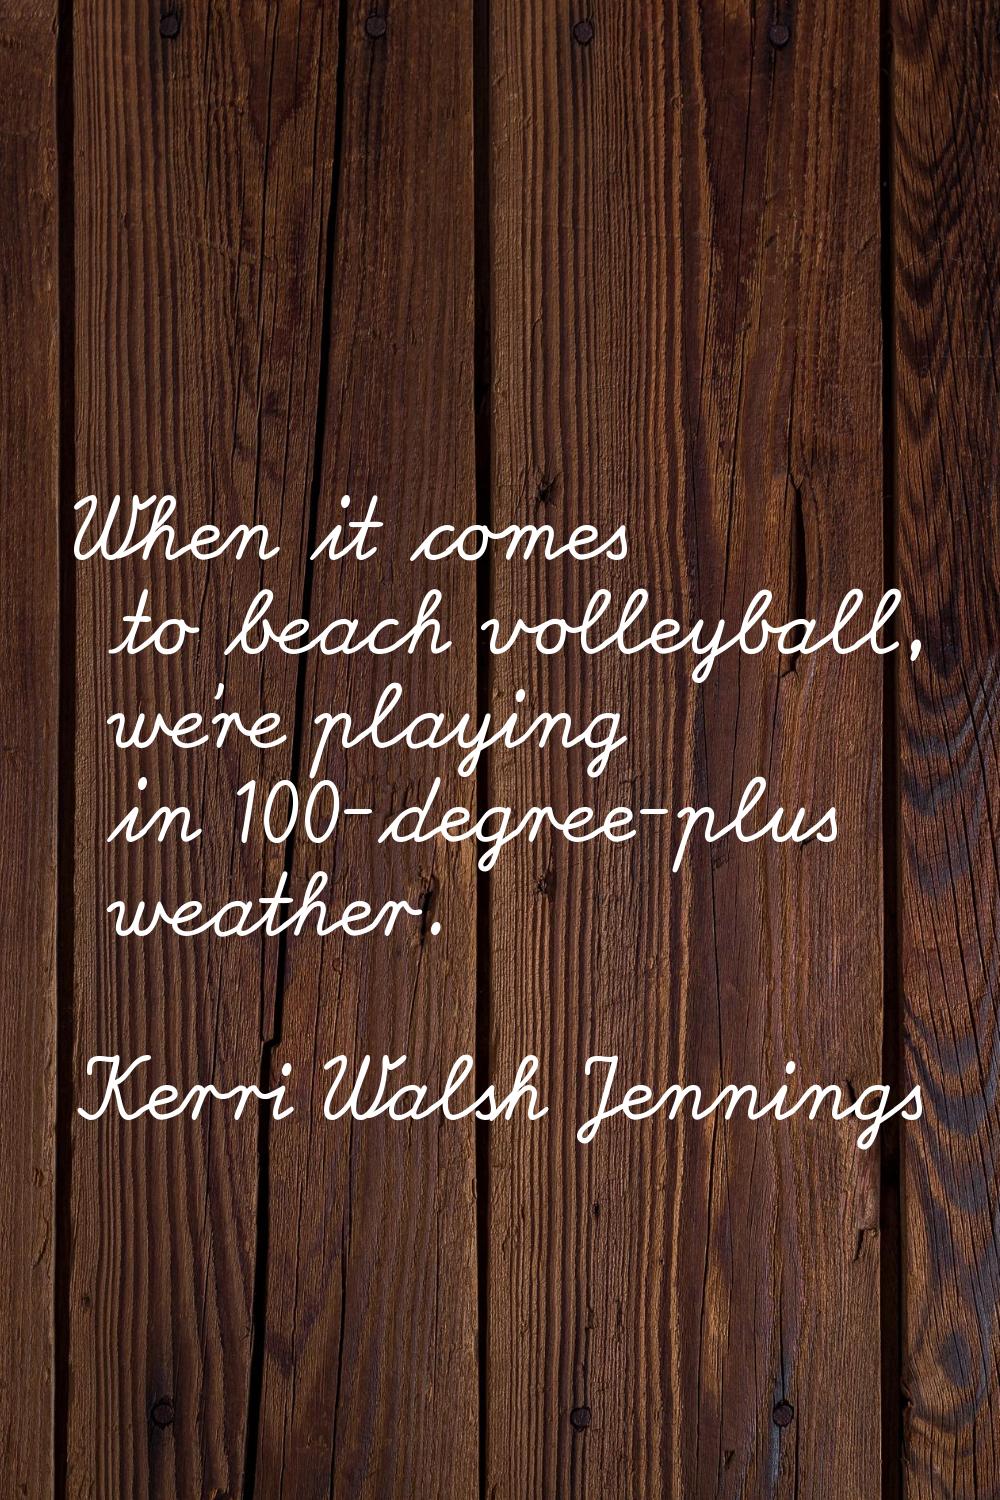 When it comes to beach volleyball, we're playing in 100-degree-plus weather.